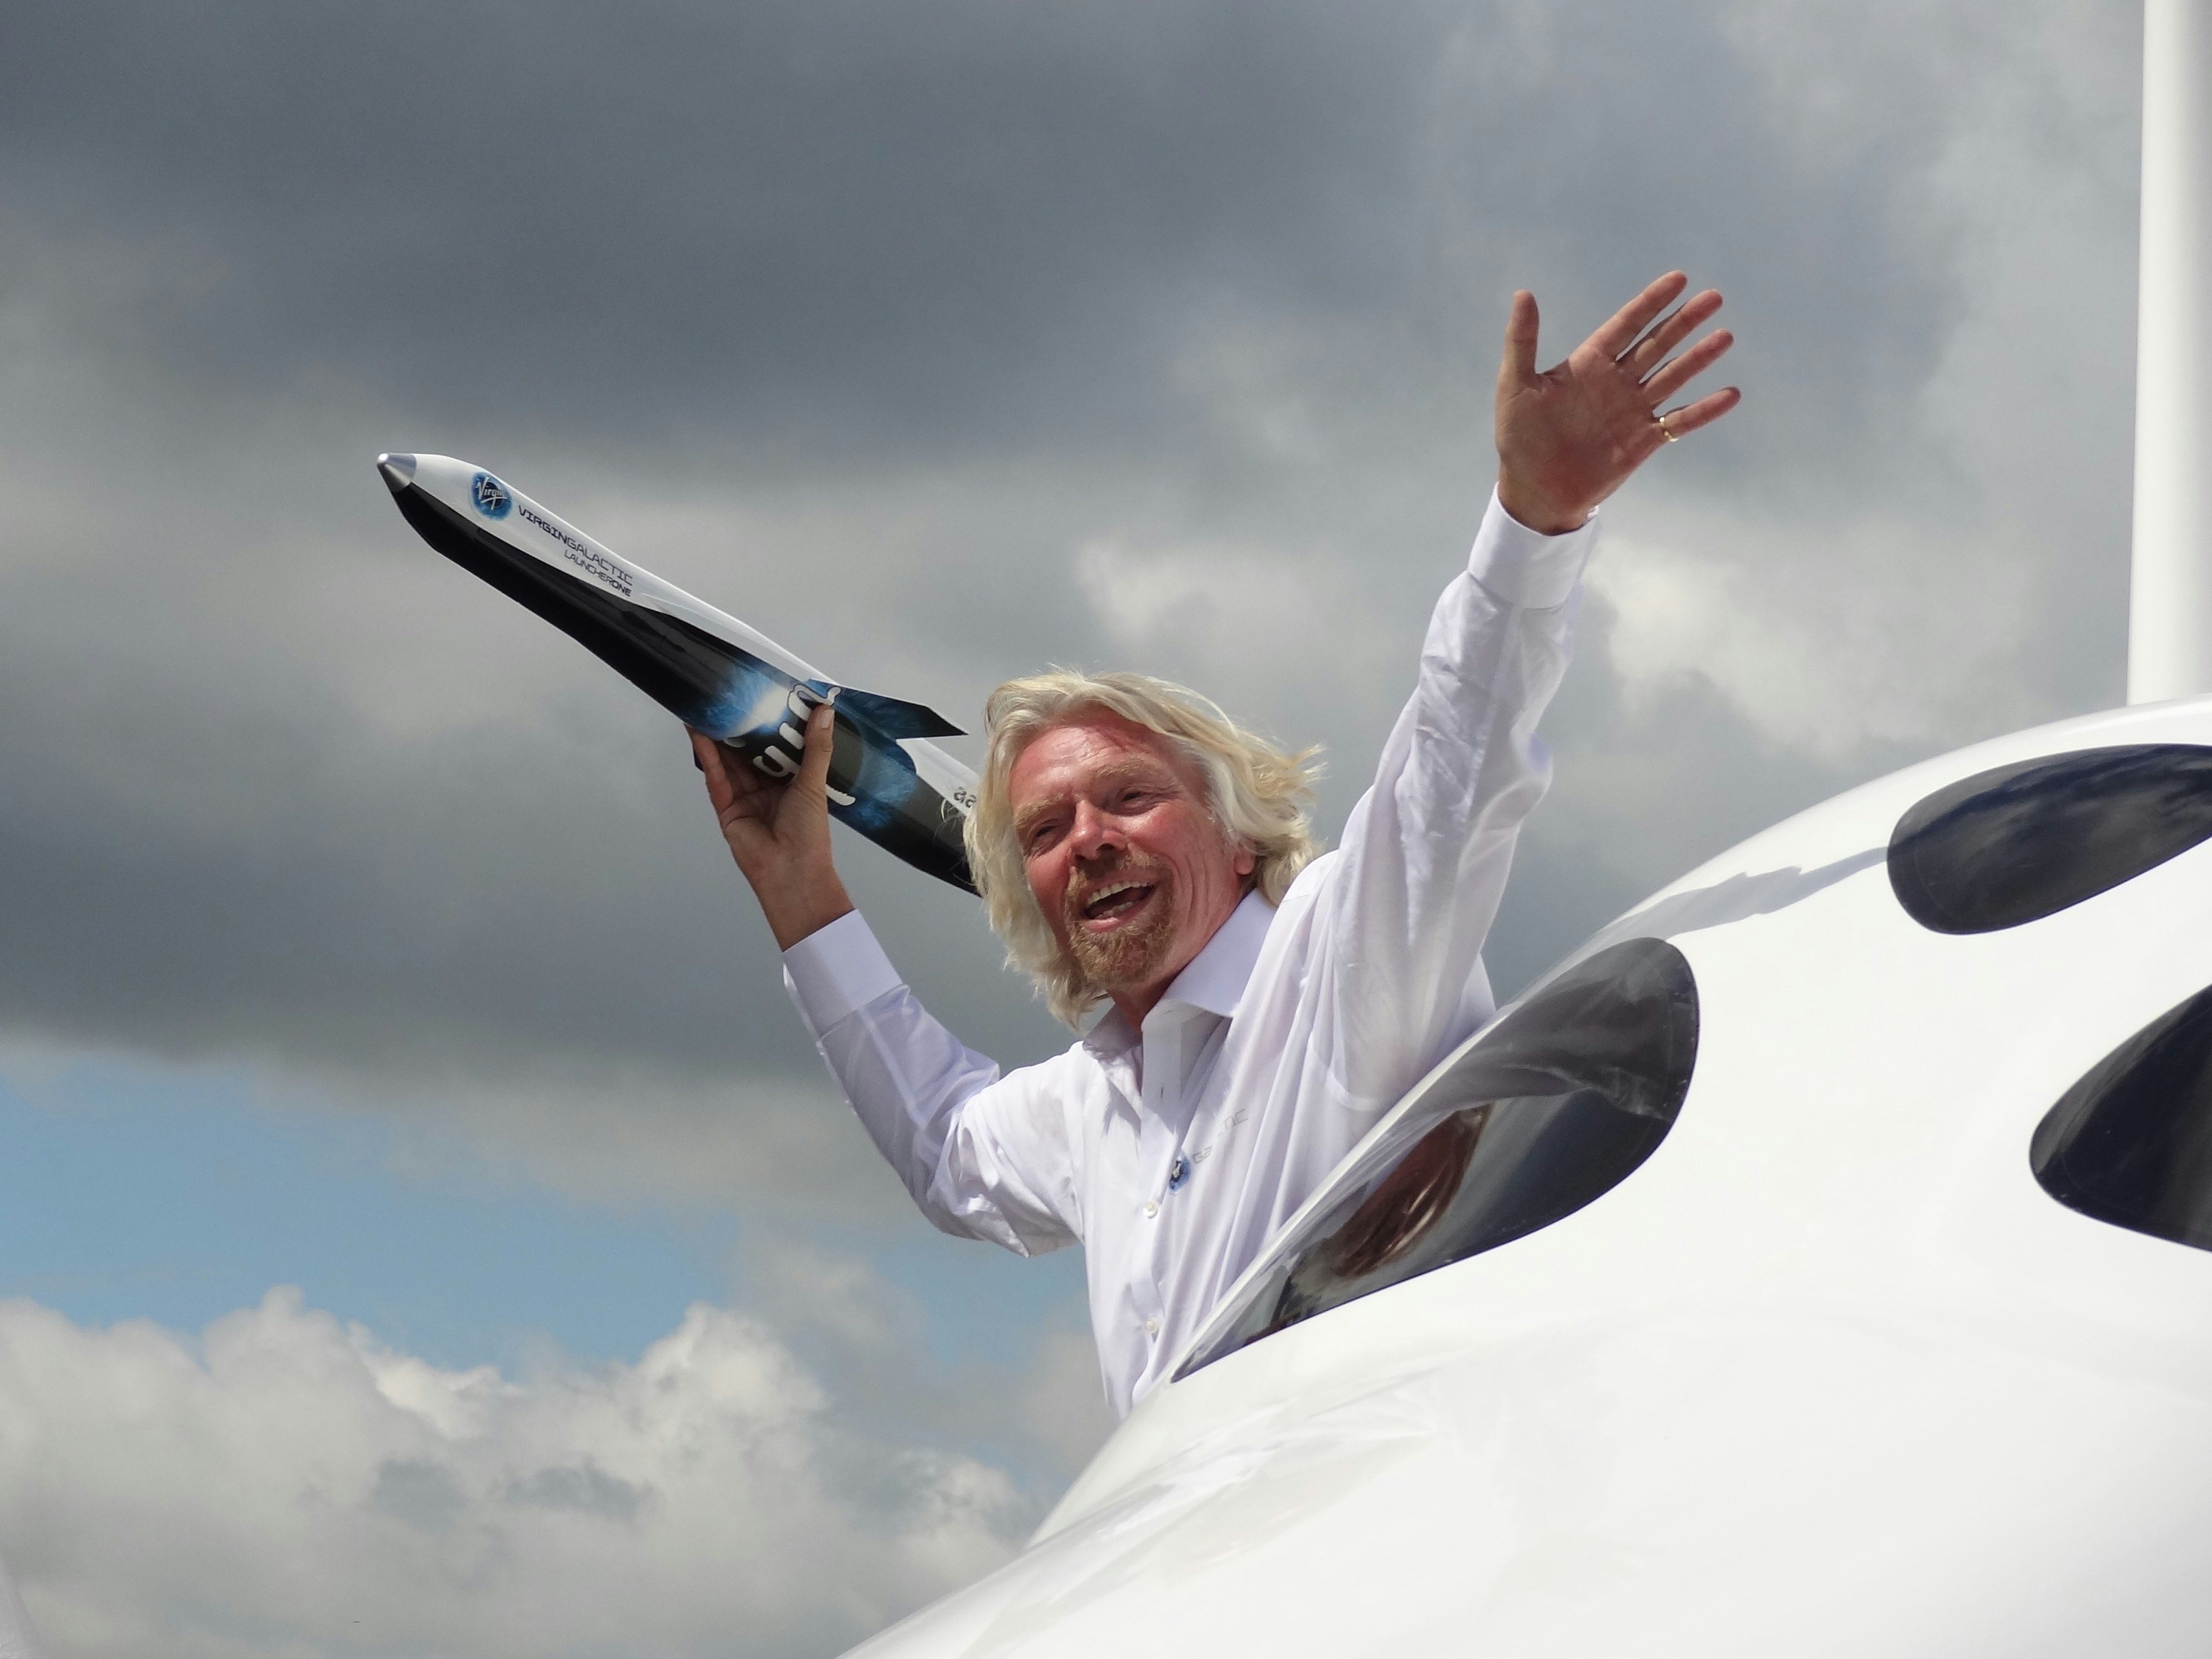 richard branson hanging out of an airplane holding a small replica spaceship